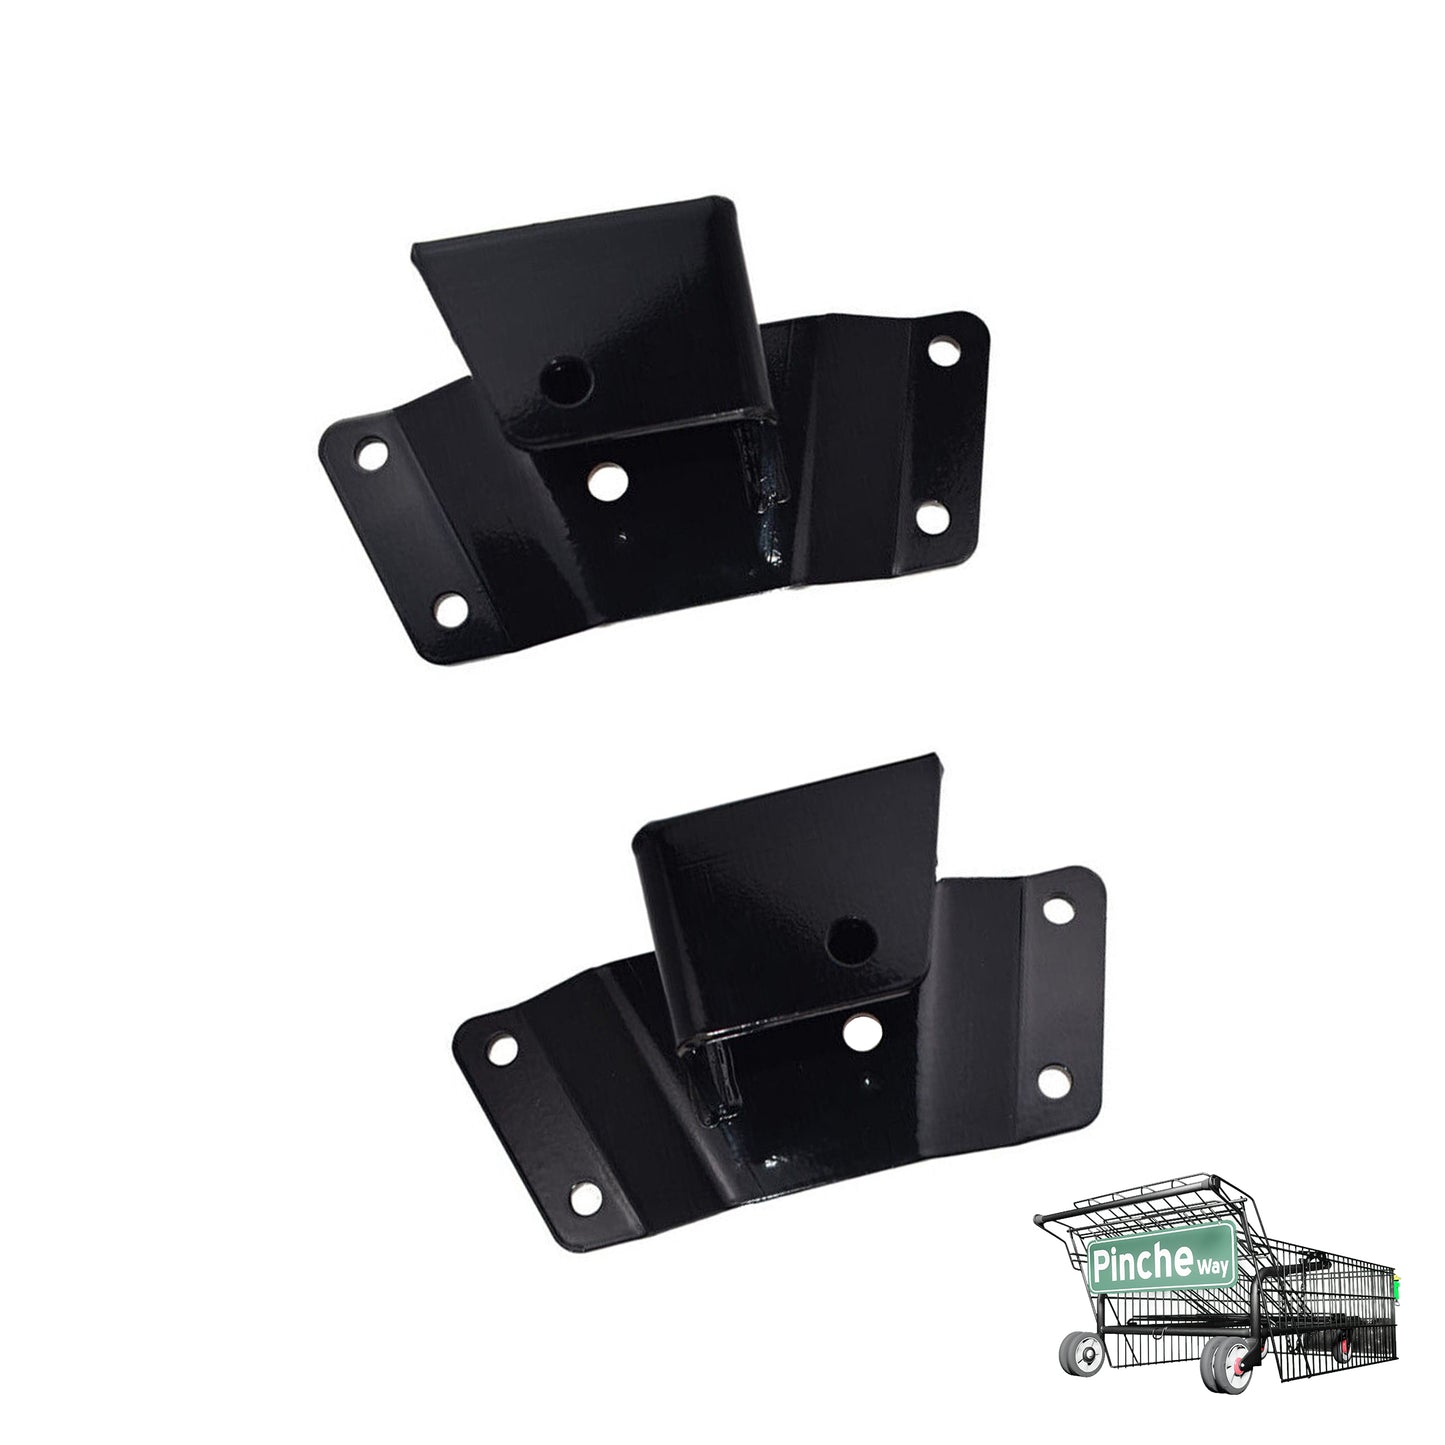 2" Rear Lowering Hangers for 1988-98 Chevy/GMC C1500 GMT 400